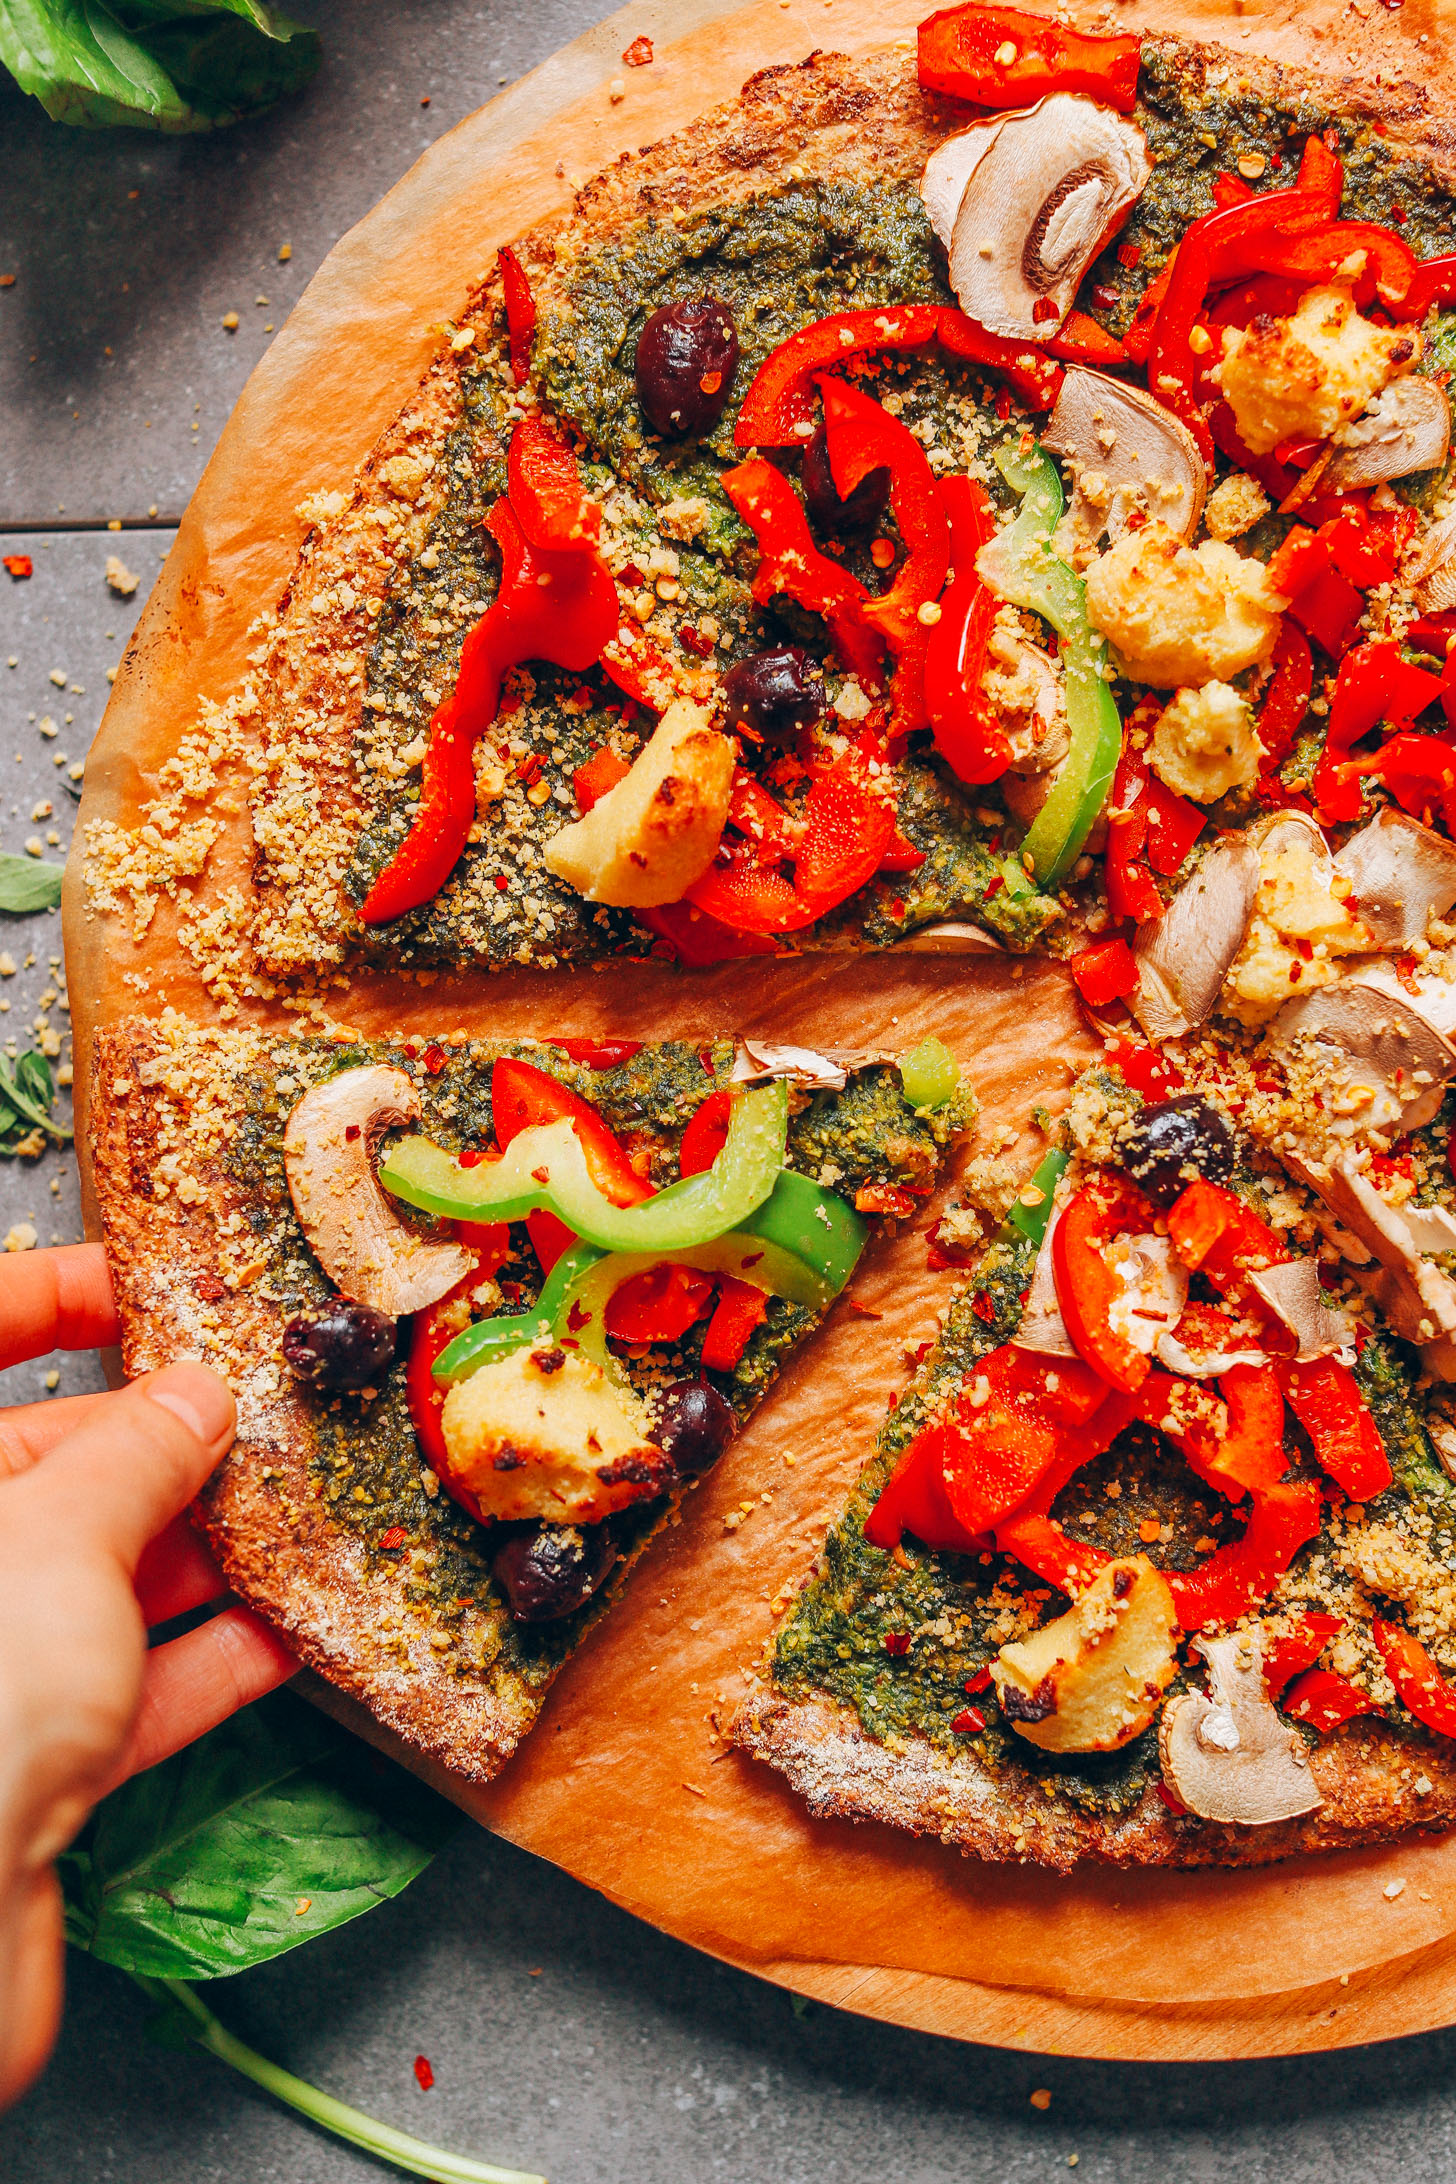 Picking up a slice of pizza topped with fresh vegetables and made using our vegan Gluten-Free Cauliflower Pizza Crust recipe